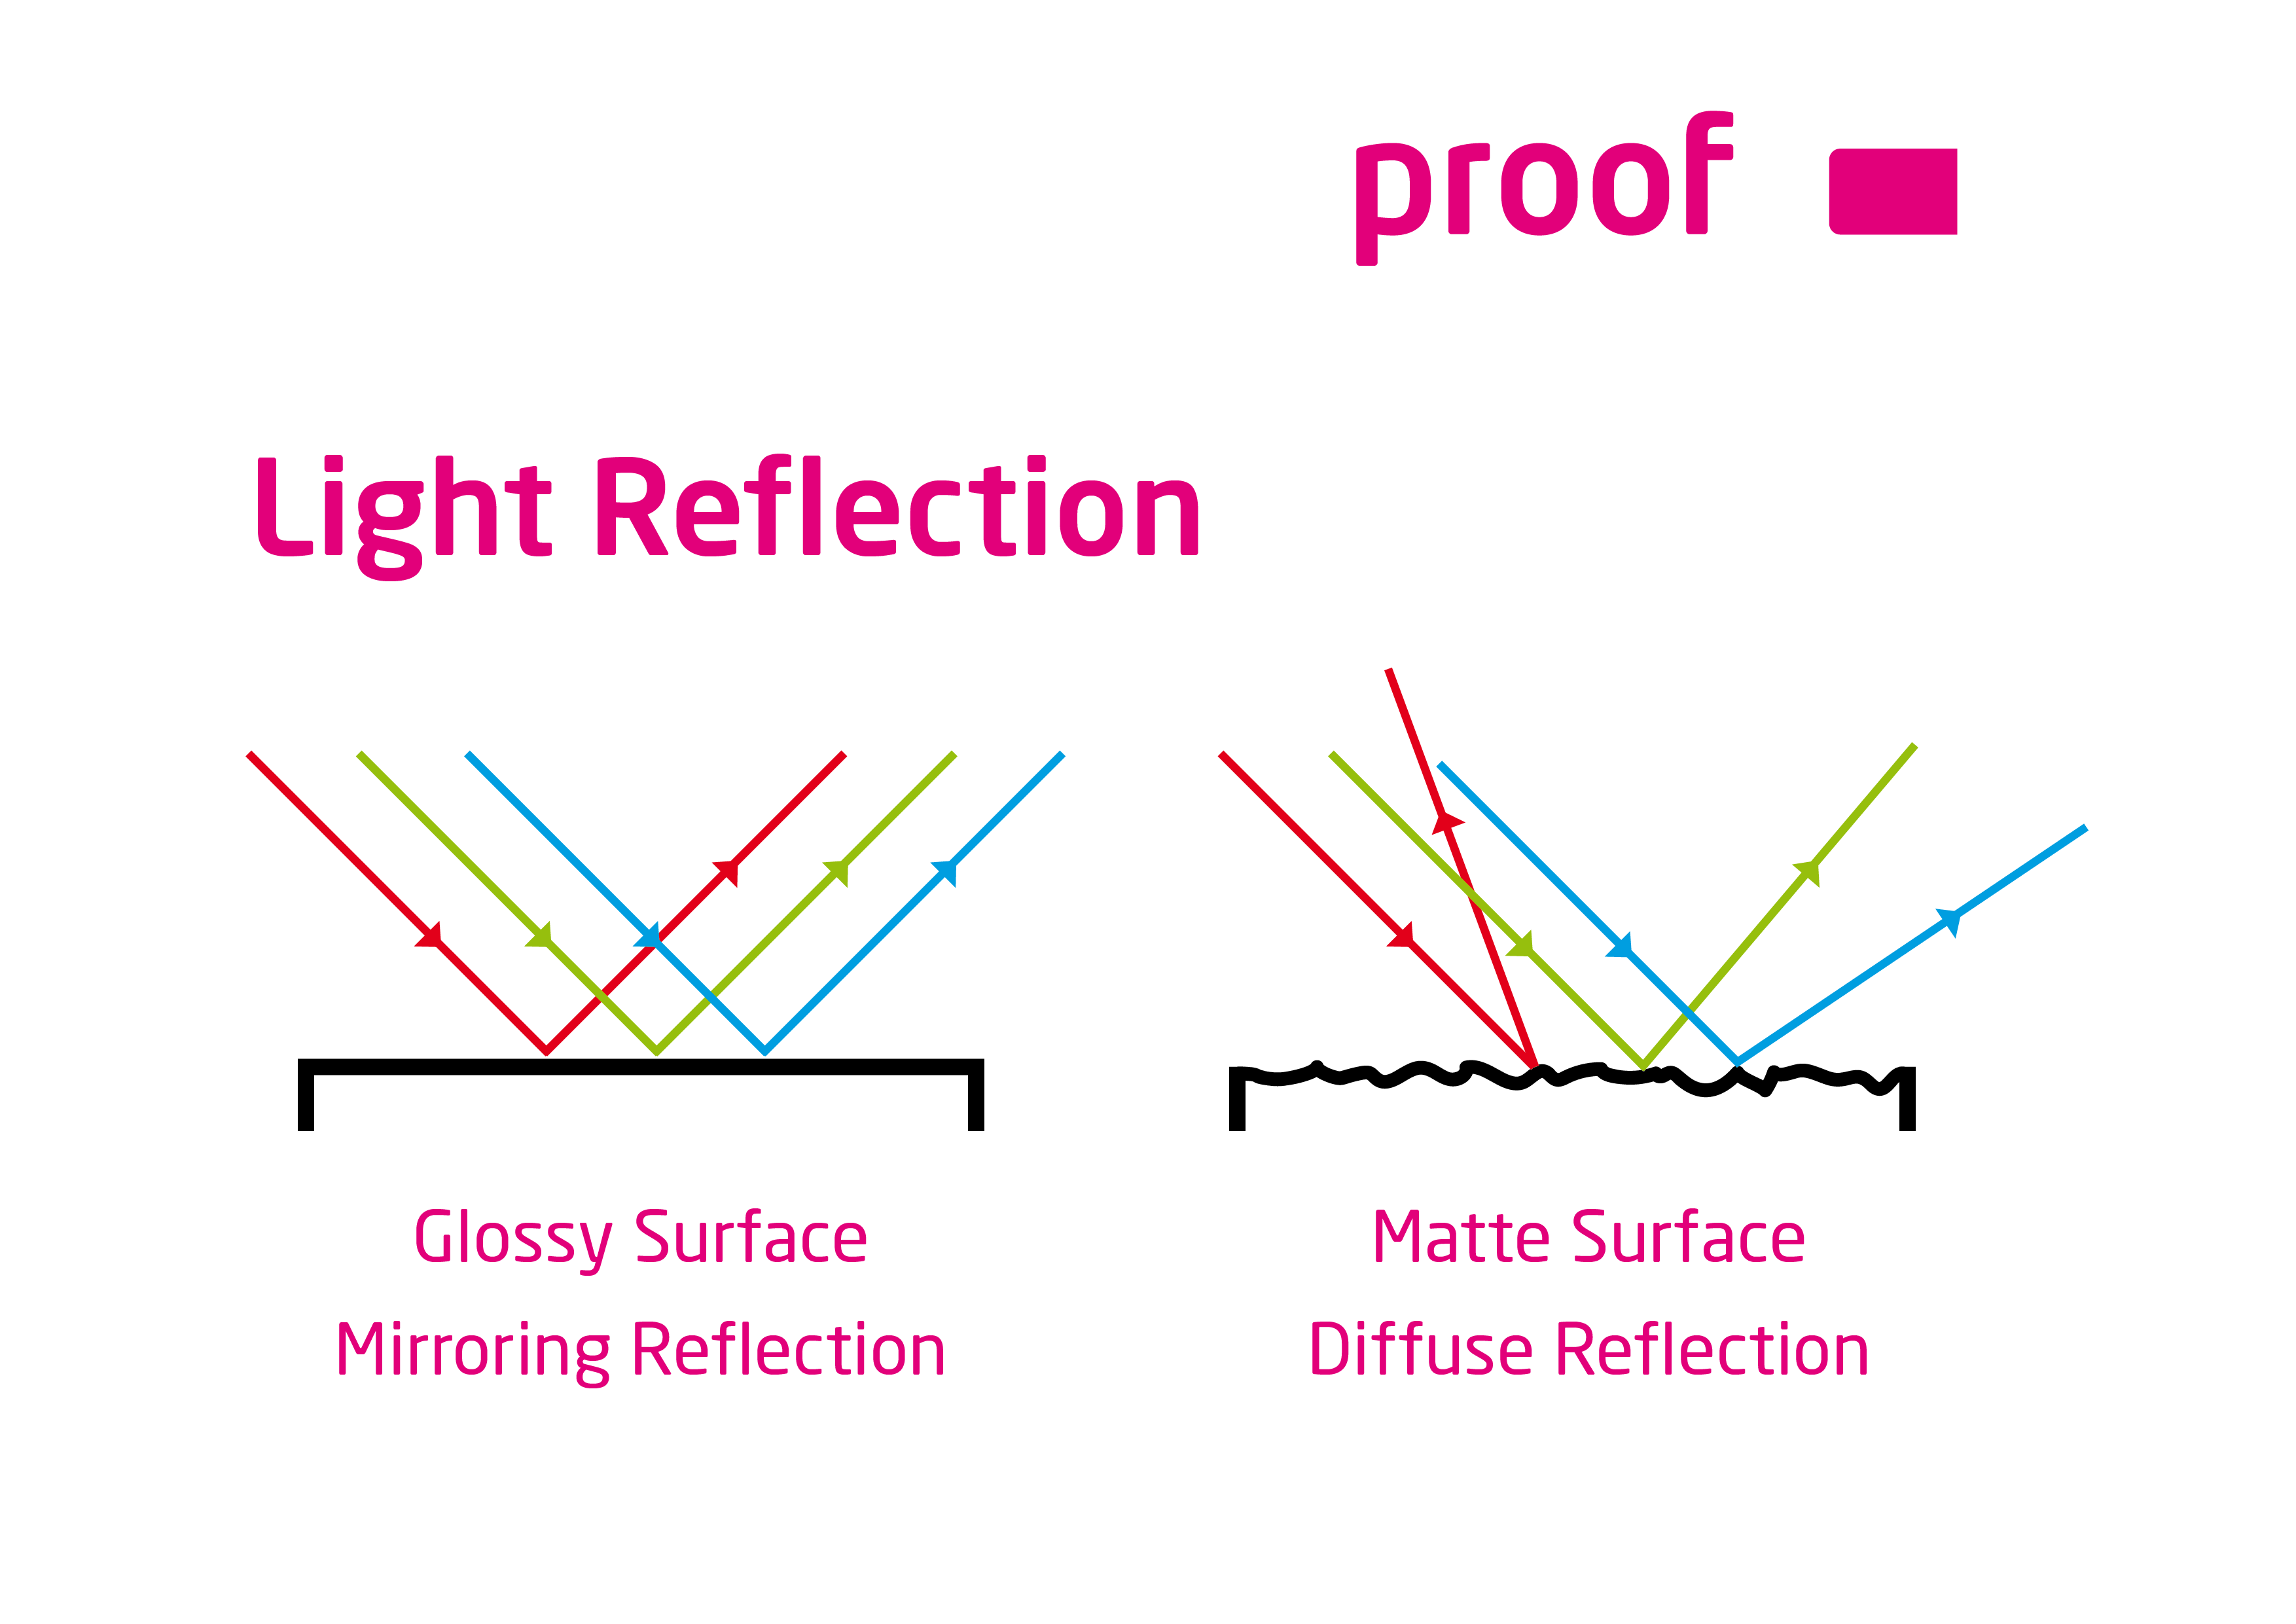 Proof De Light Reflection Specular And Diffuse From Matte And Glossy Objects EN 